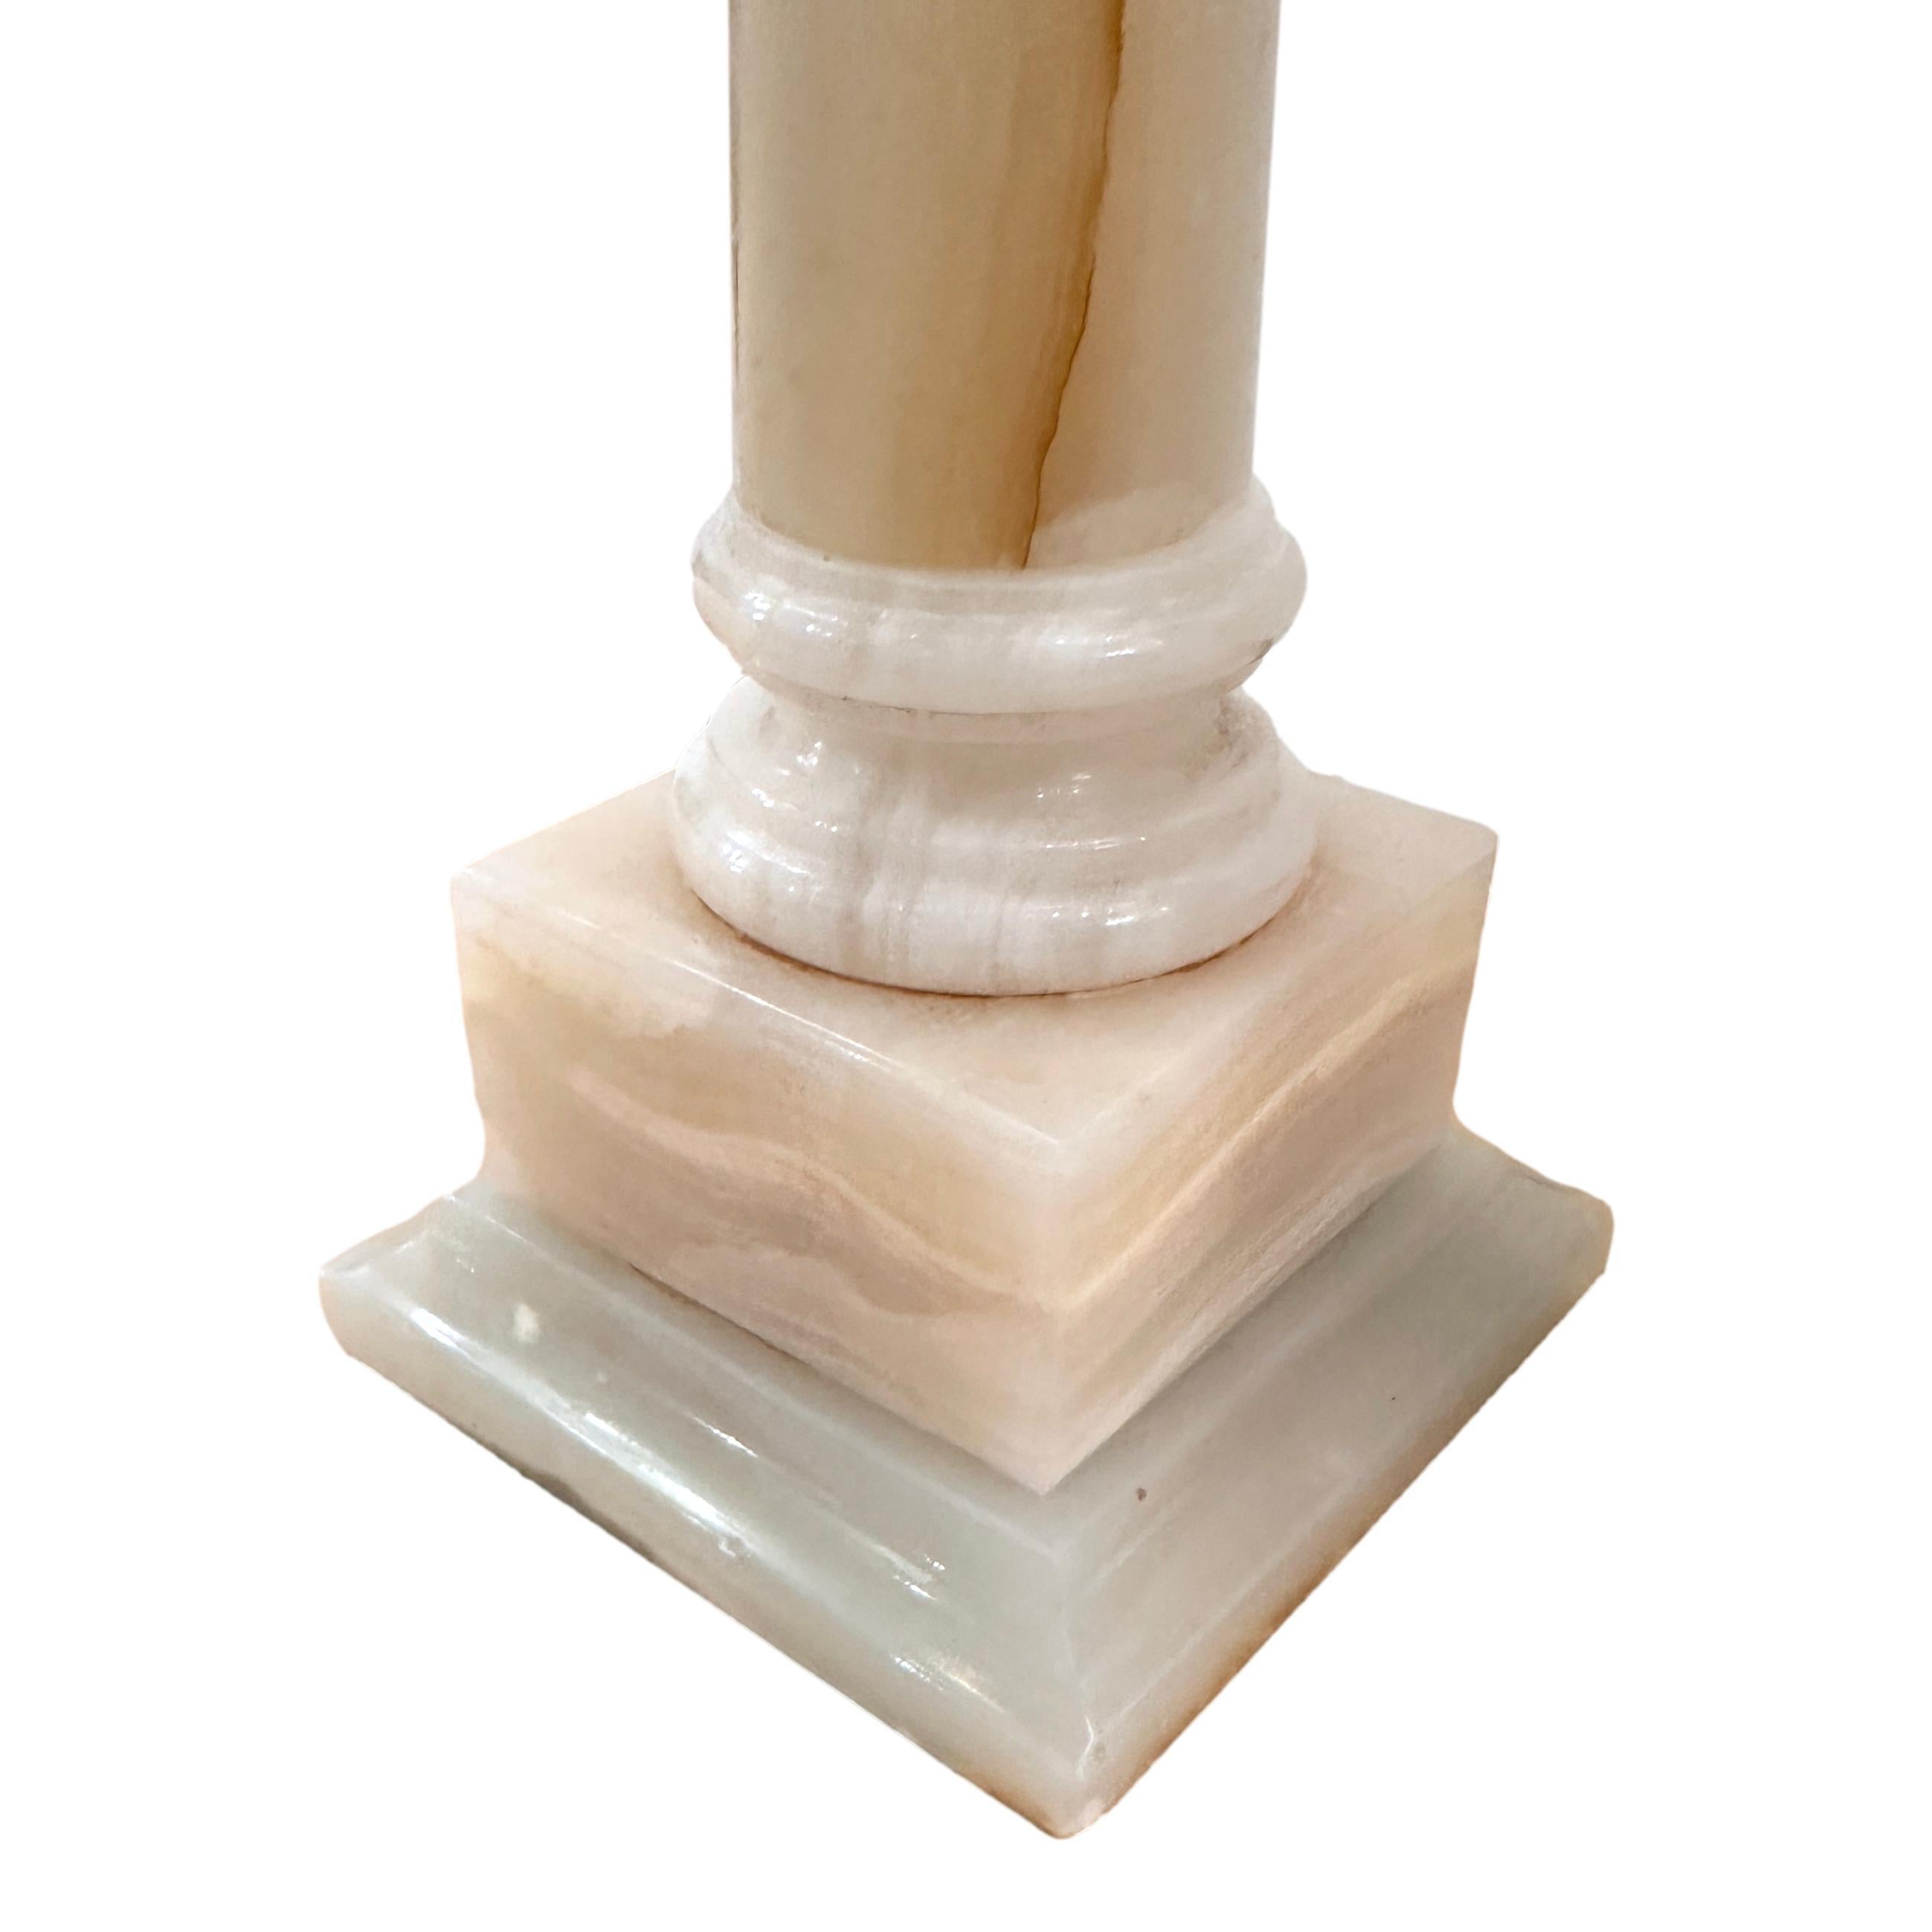 Pair of circa 1940's Italian carved onyx column table lamps.

Measurements:
Height of body: 18